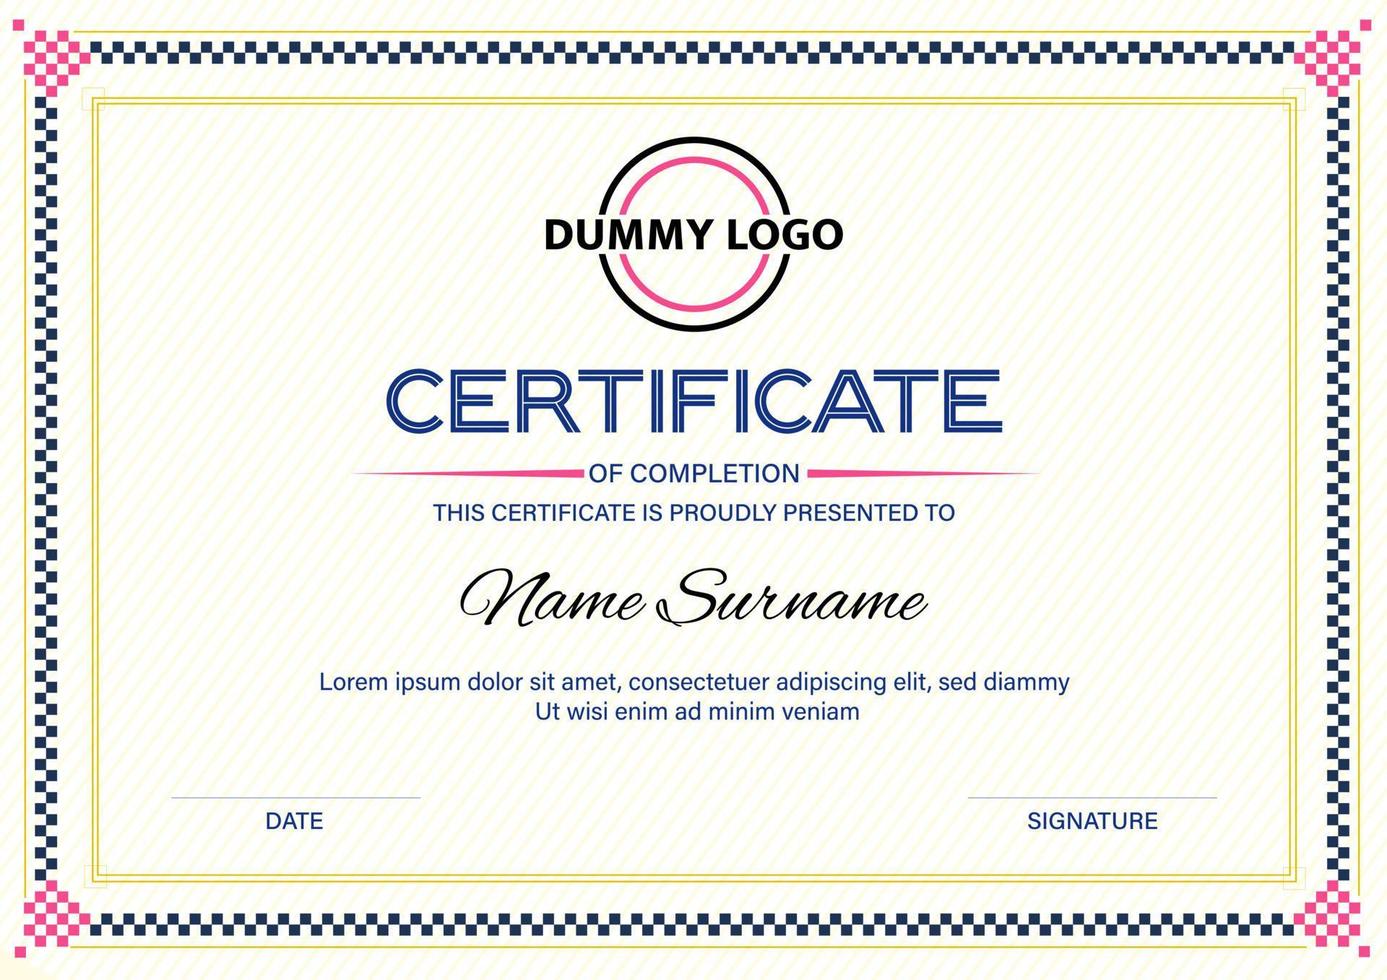 Dummy certificate template in vector. High Education certificate. vector